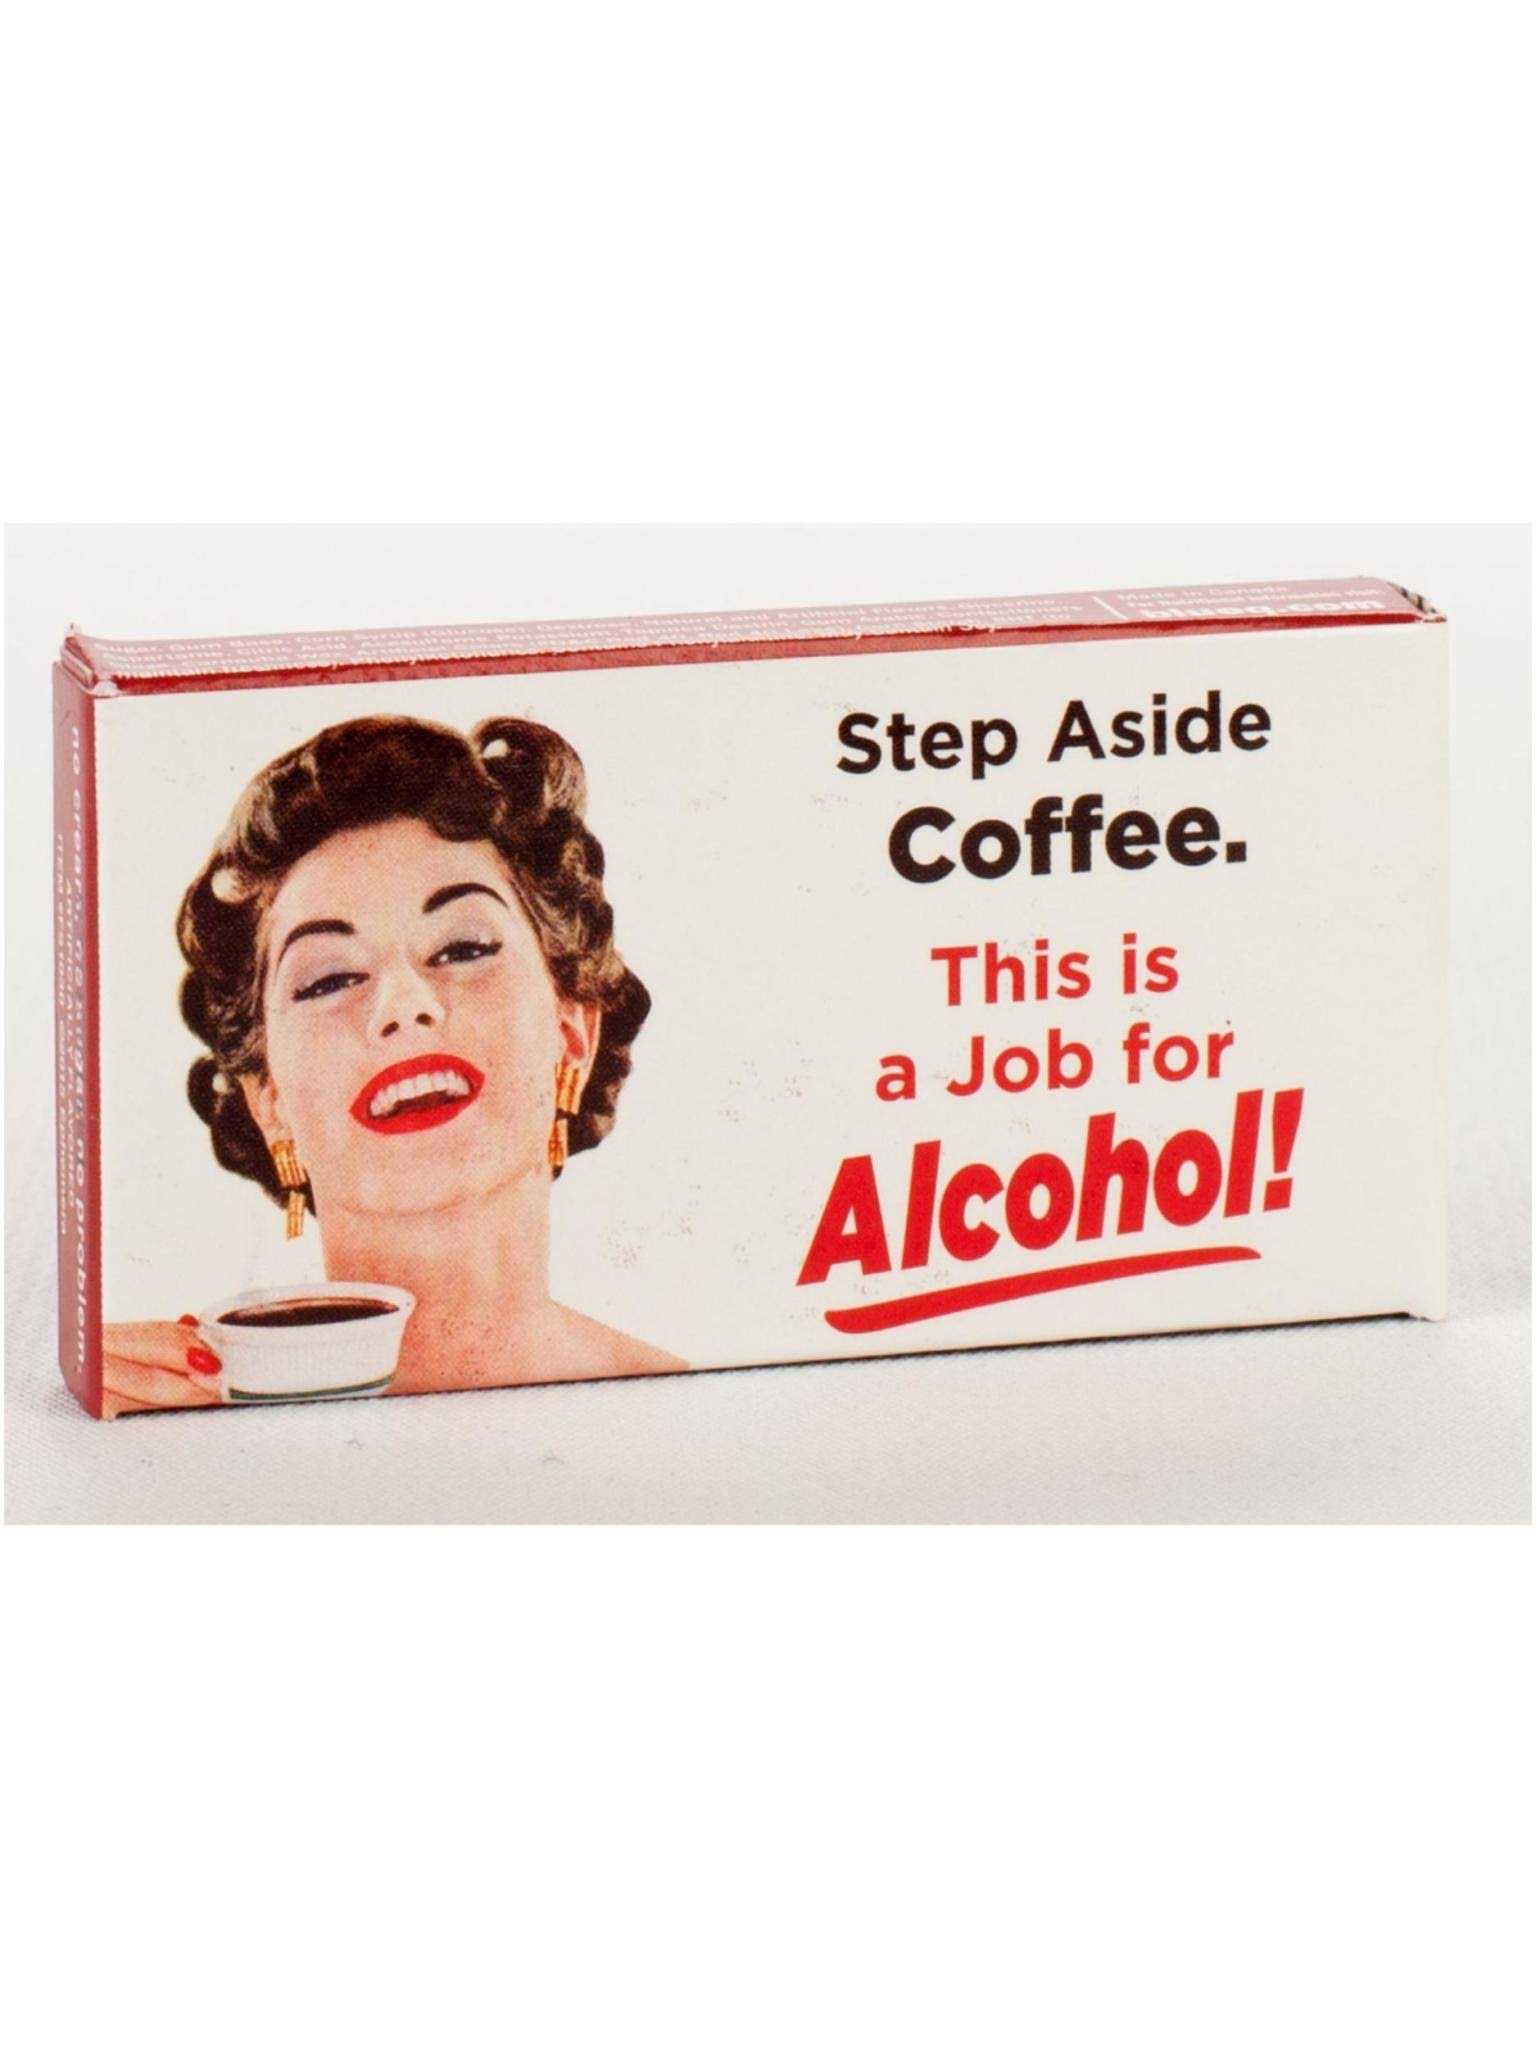 Step Aside Coffee This Job Is for Alcohol Cinnamon Gum - 4 Pack